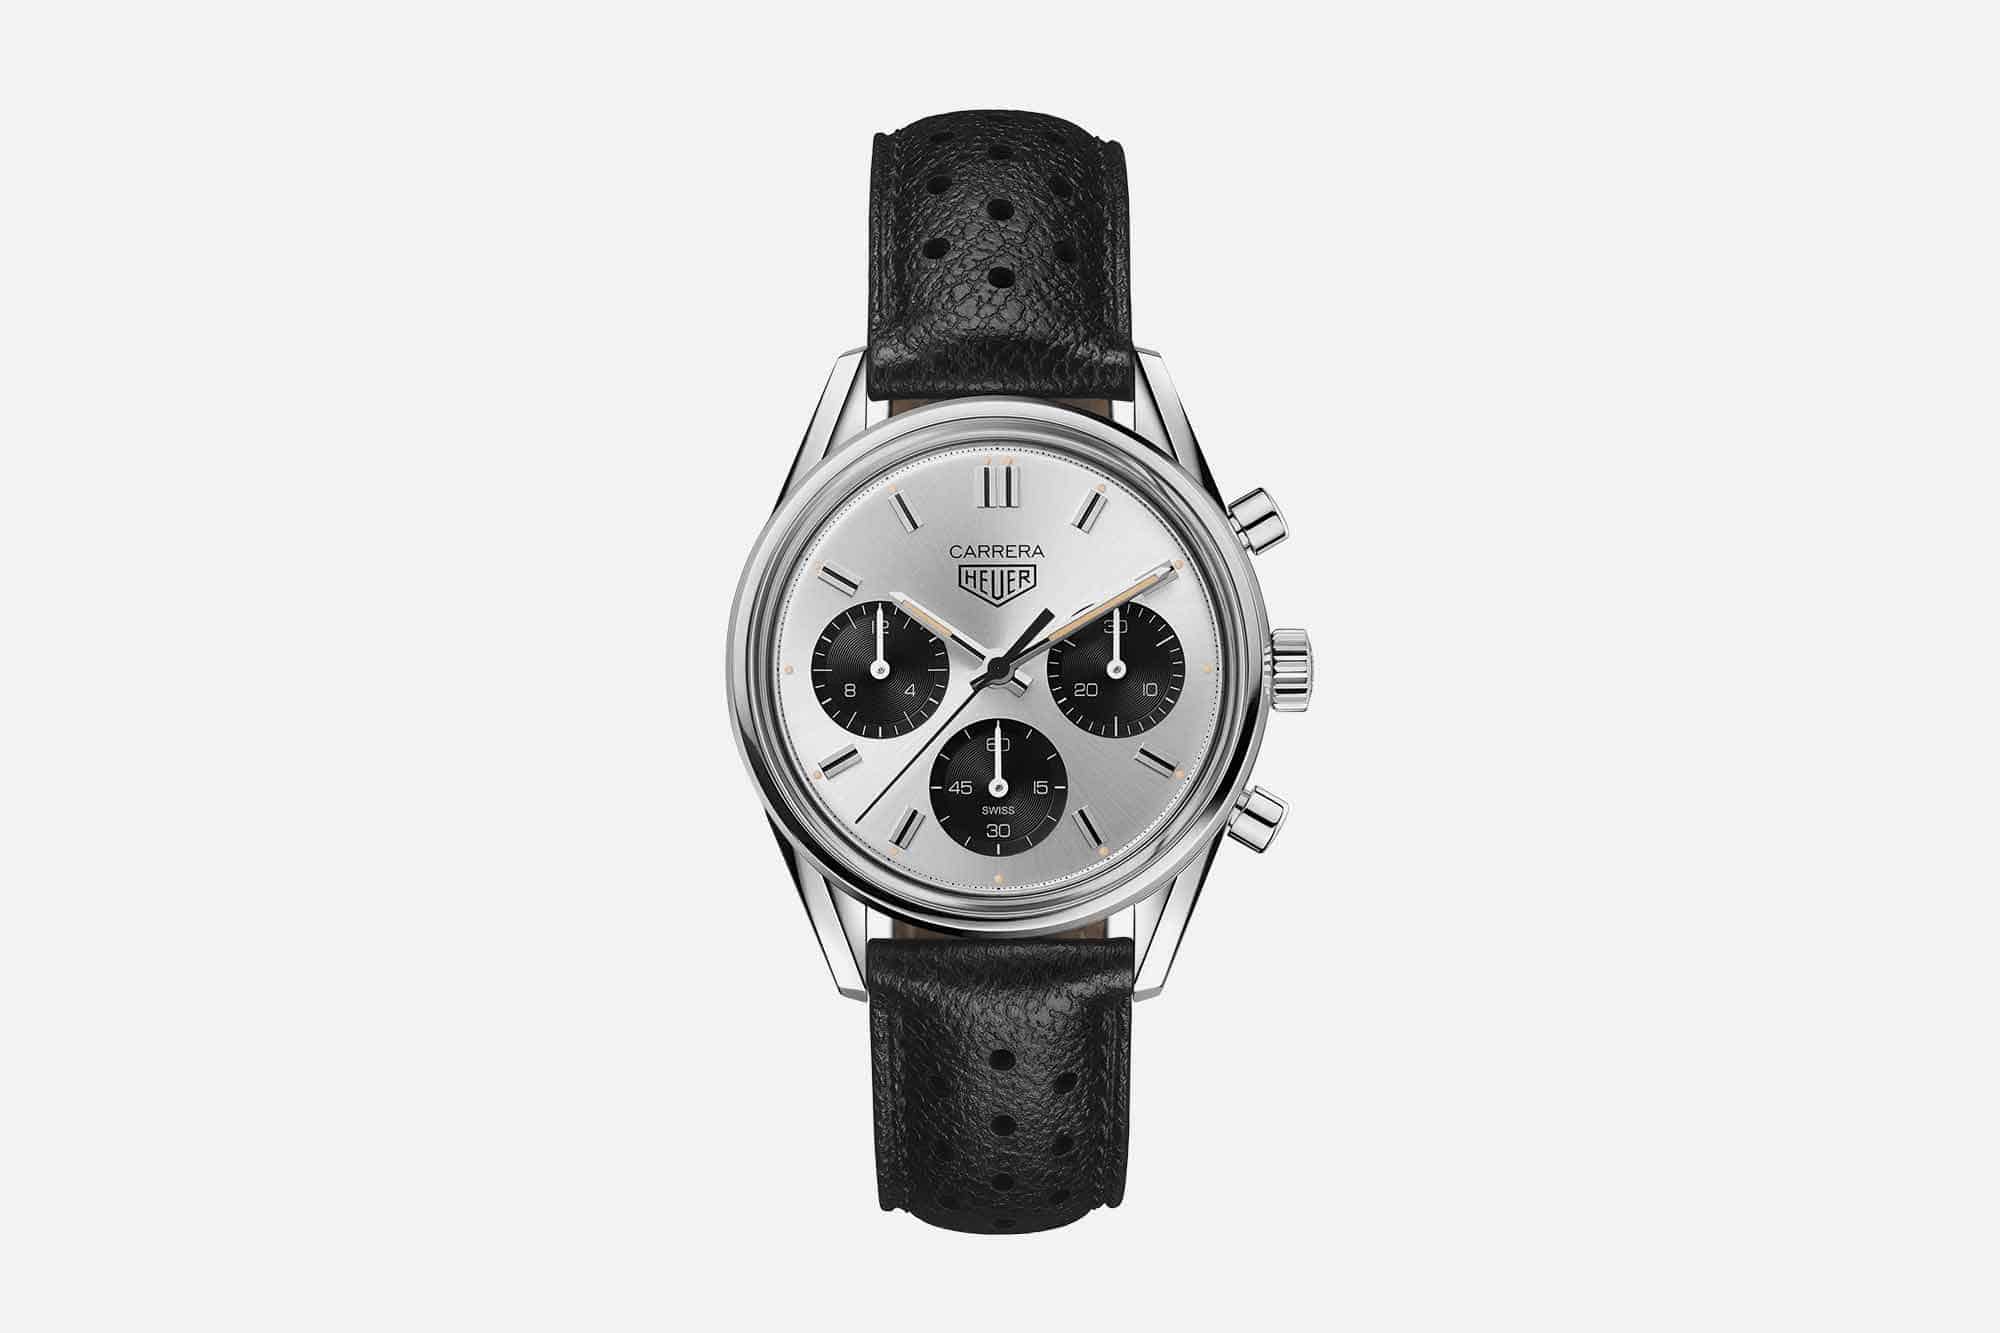 The Carrera Turns 60 this Year, and TAG Heuer is Celebrating